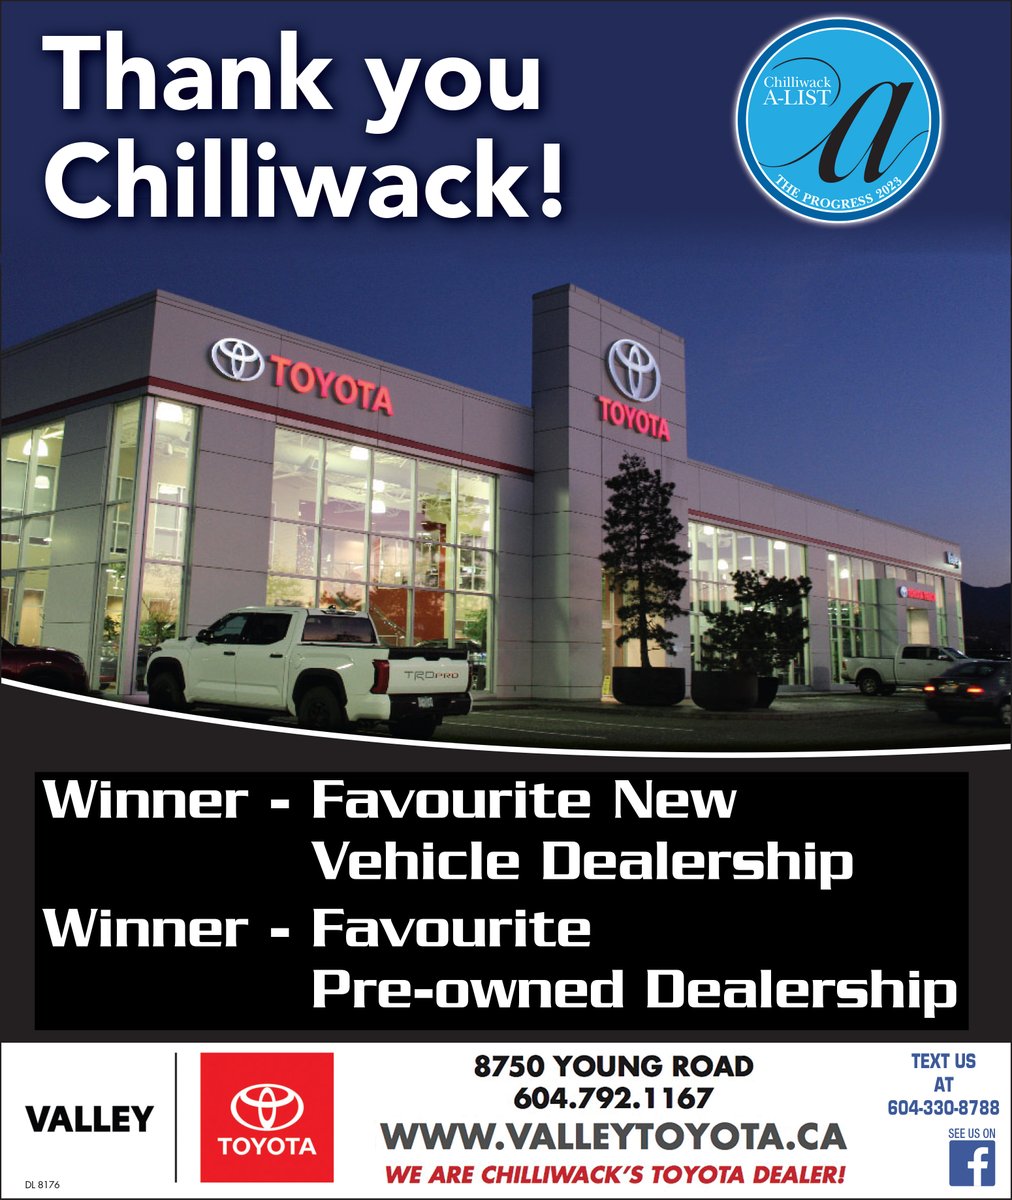 Thank you Chilliwack!

It's an honor to have been voted yet again this year, both your 'Favourite New Vehicle Dealership' and 'Favourite Pre-owned Dealership' by you, the people of Chilliwack!

#chilliwack #chilliwackbc #fraservalley #ValleyToyota #ToyotaBC #chilliwack